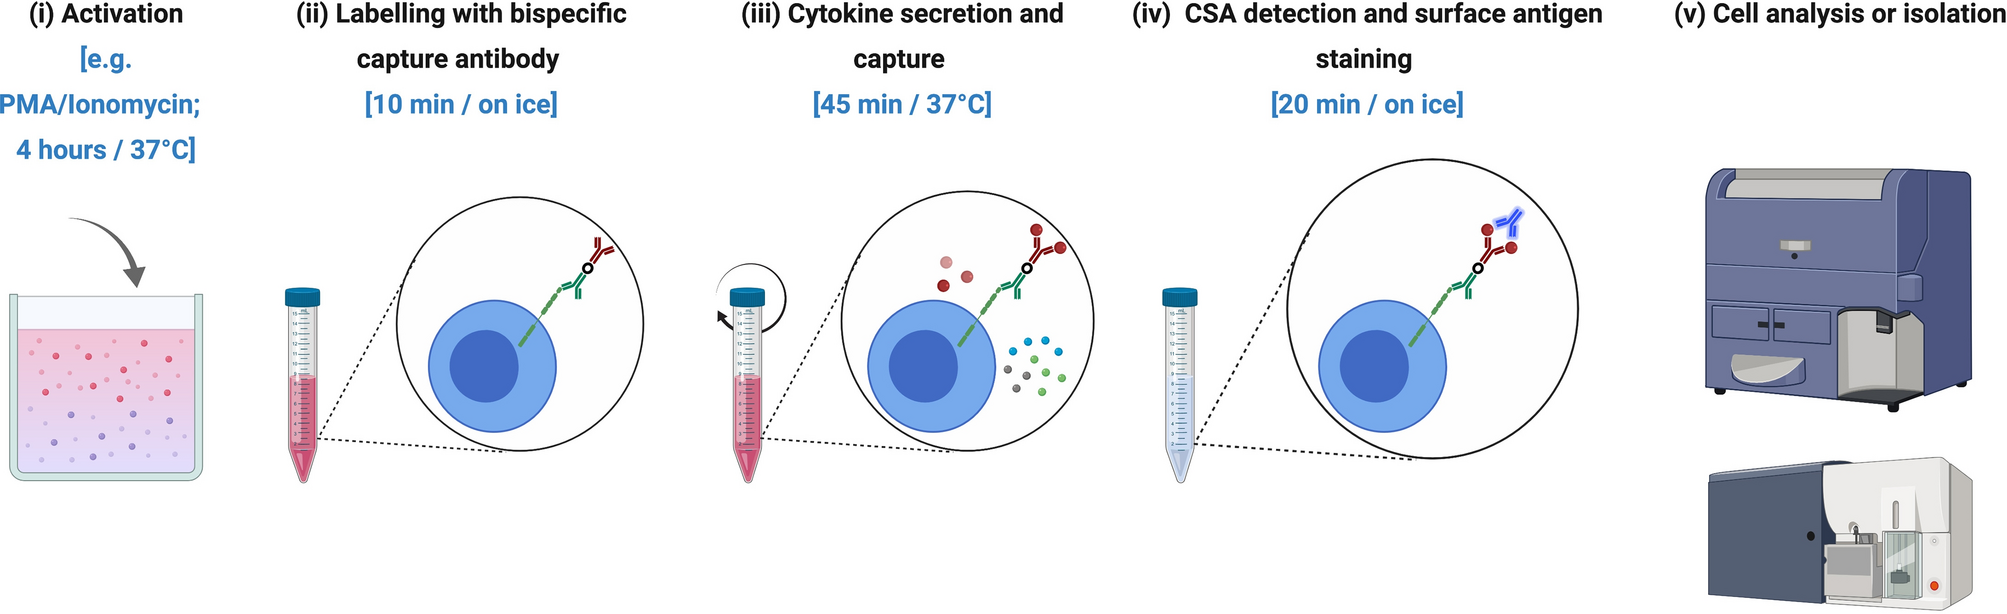 Multiplexed detection and isolation of viable low-frequency cytokine-secreting  human B cells using cytokine secretion assay and flow cytometry (CSA-Flow)  | Scientific Reports